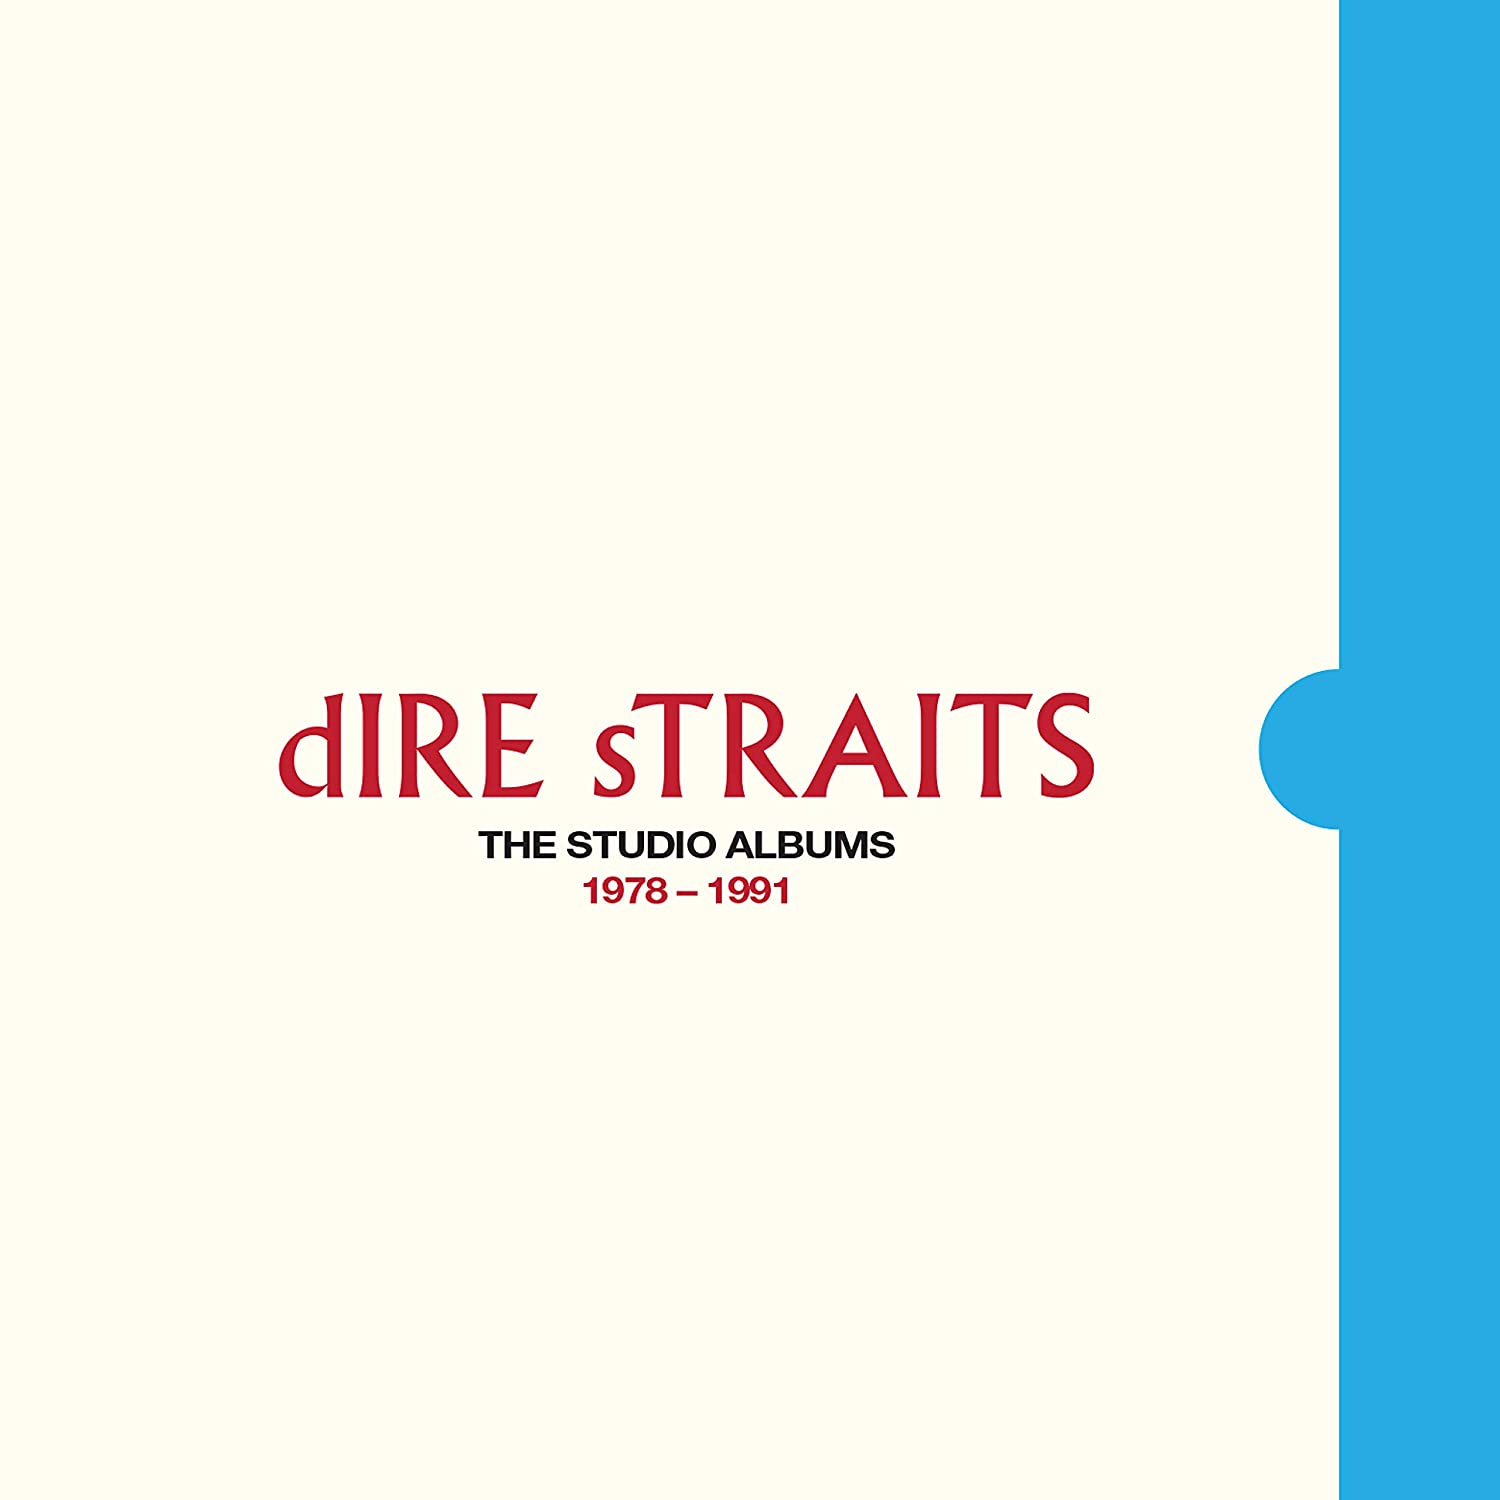 Dire Straits / The Studio Albums 1978 – 1991 box set is finally issued on CD  – SuperDeluxeEdition